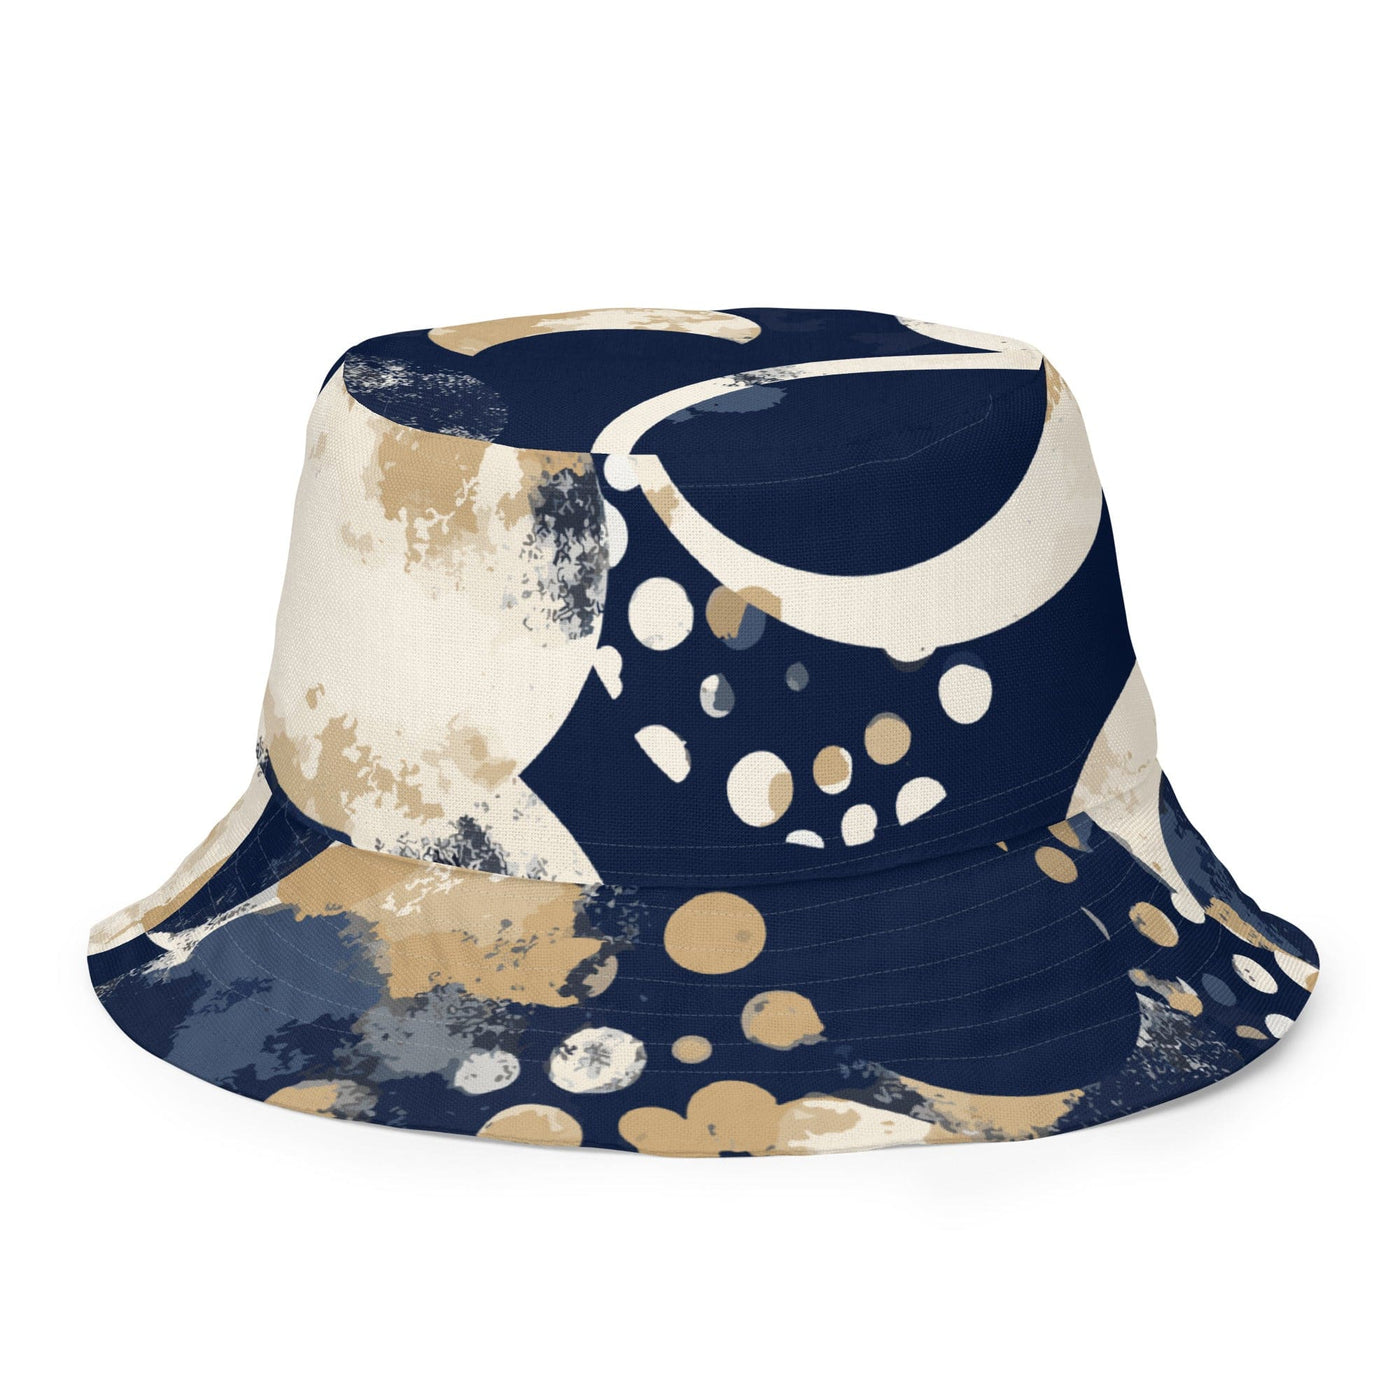 Reversible Bucket Hat Navy Blue And Beige Spotted Illustration